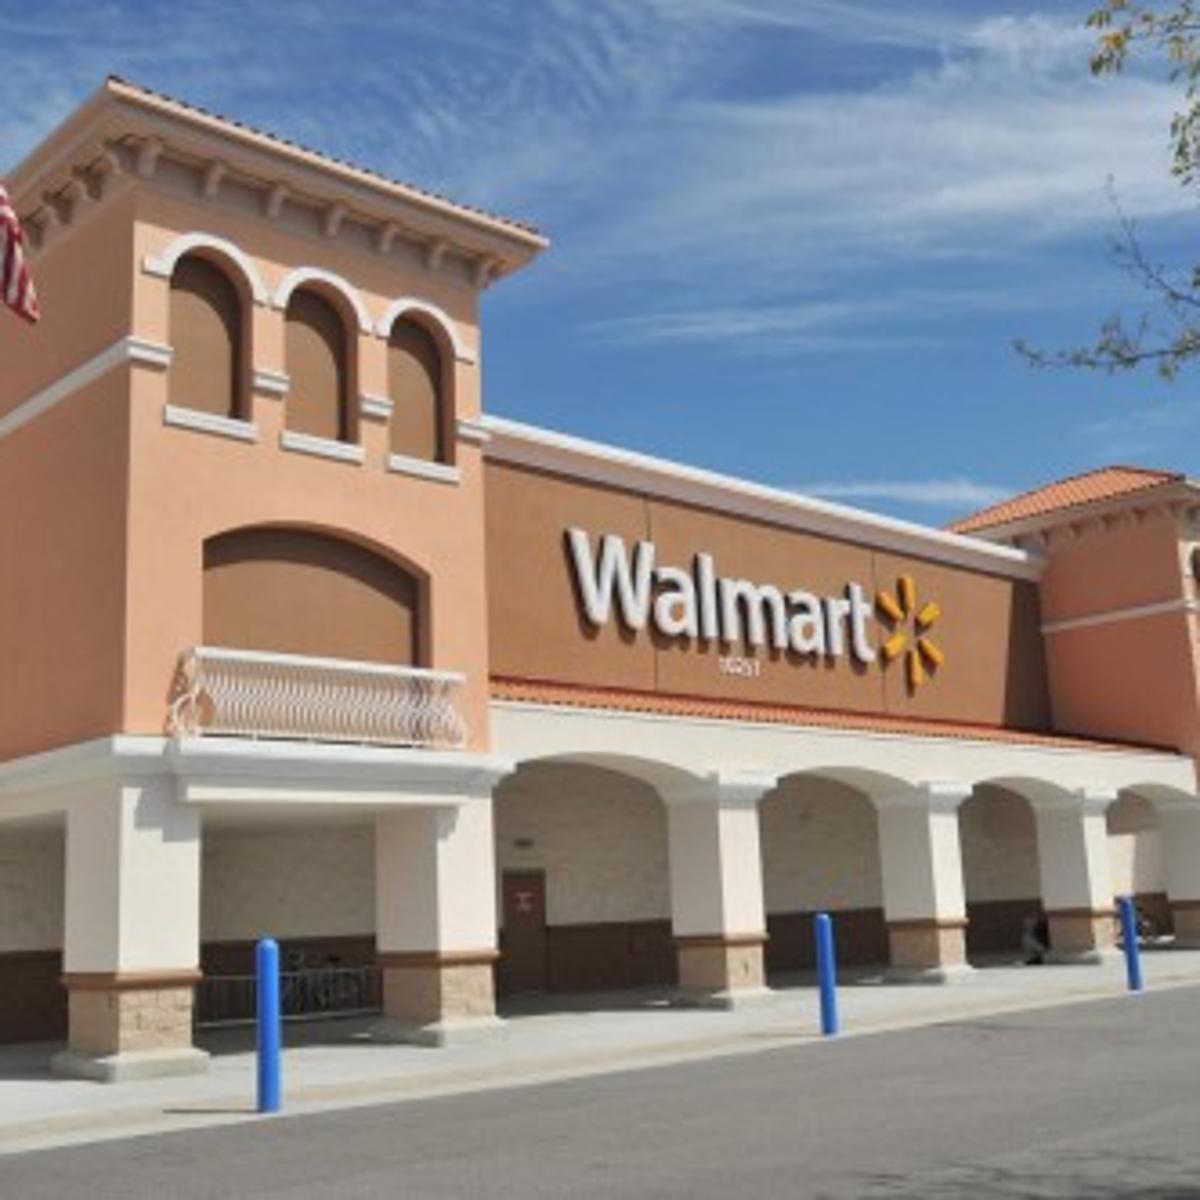 Garden City Walmart To Hire 400 Taking Applications Local News